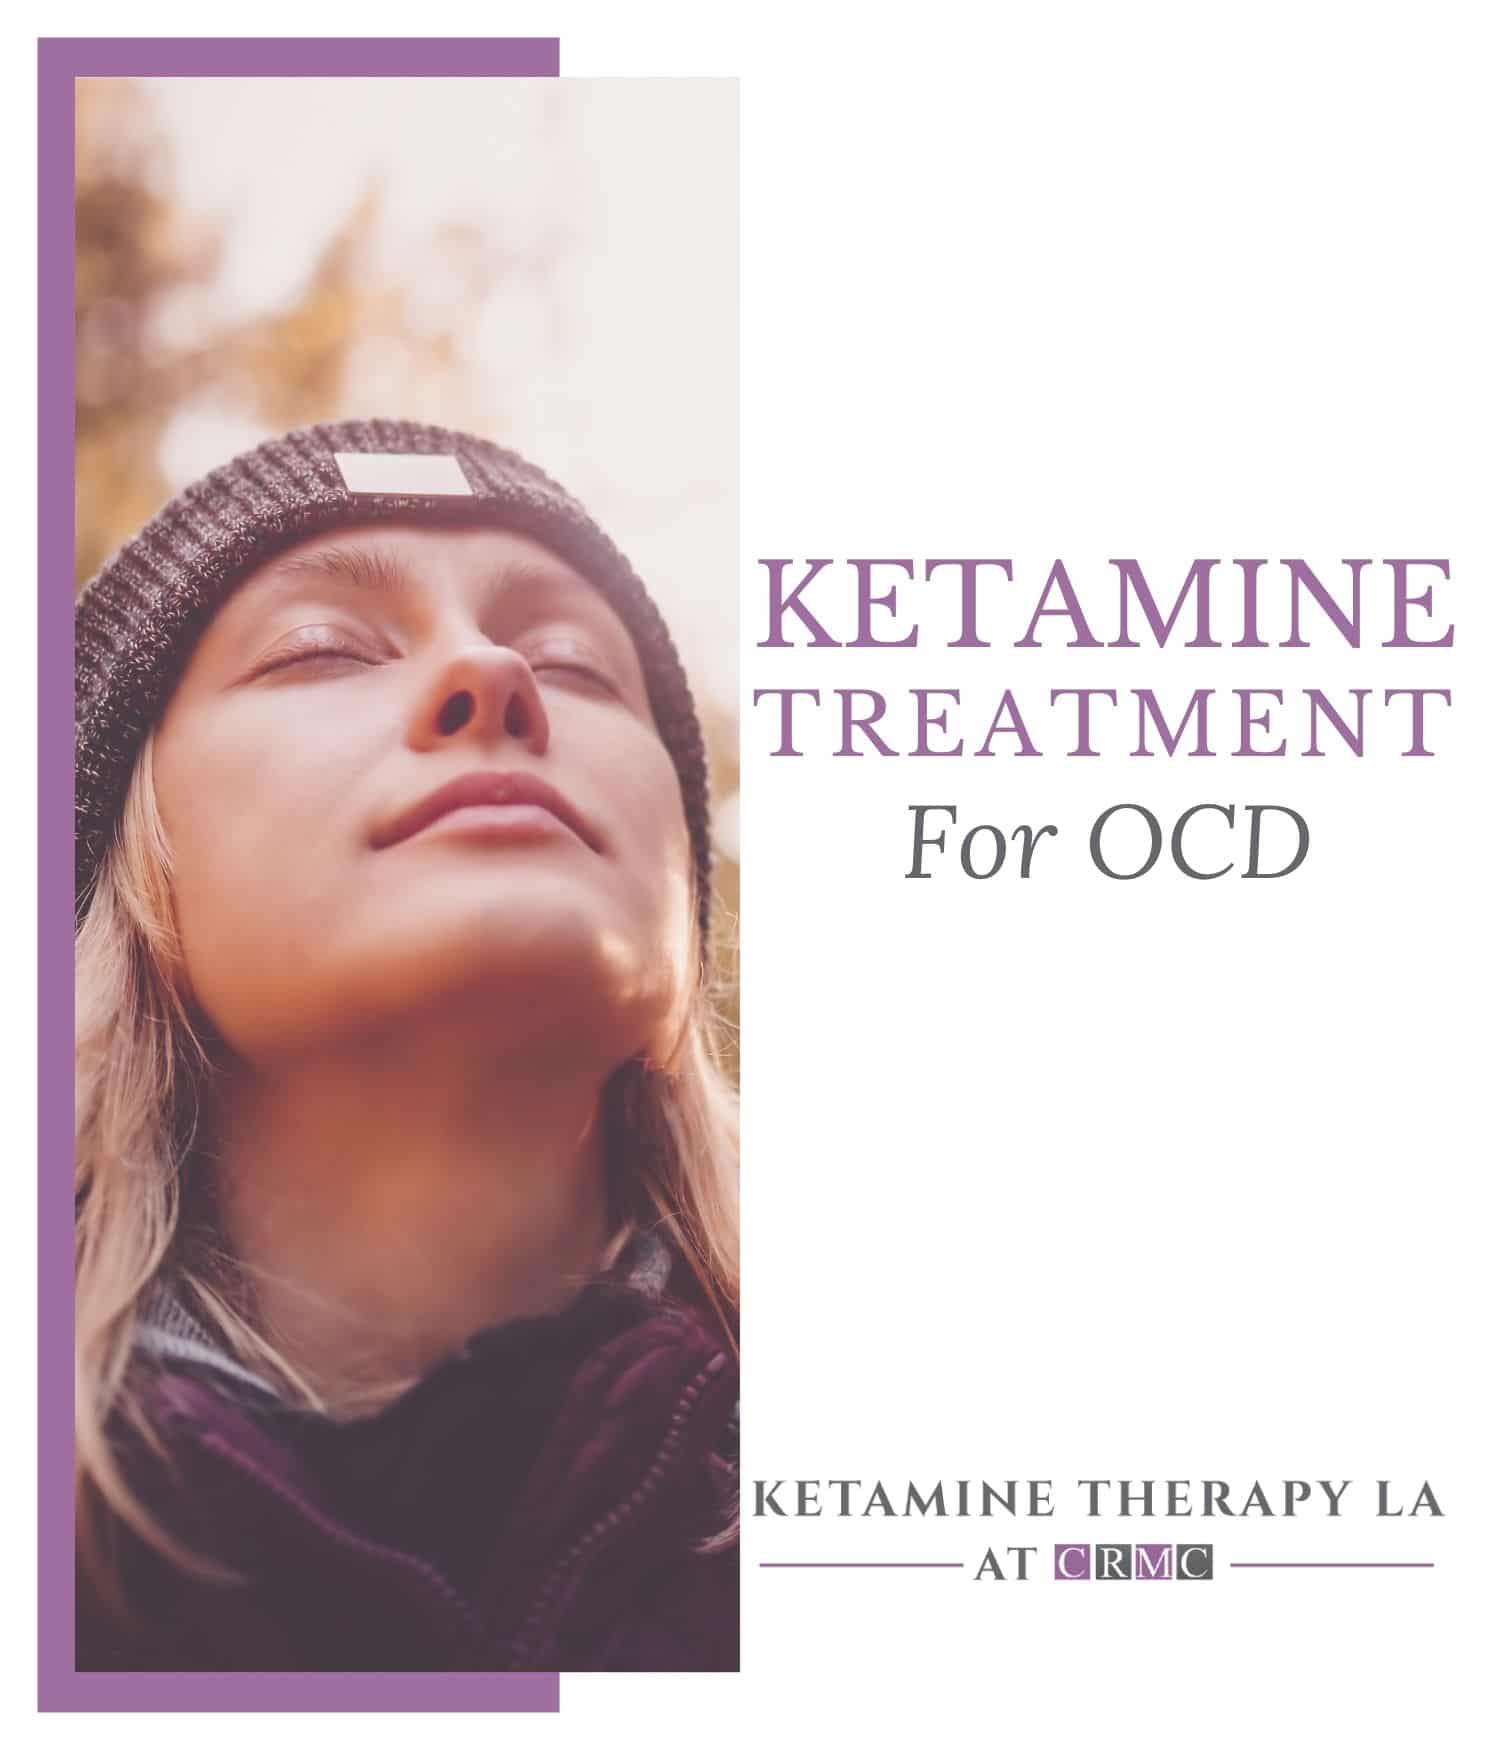 Ketamine Treatment for OCD and a woman with her head looking up and looking to be enjoying life.